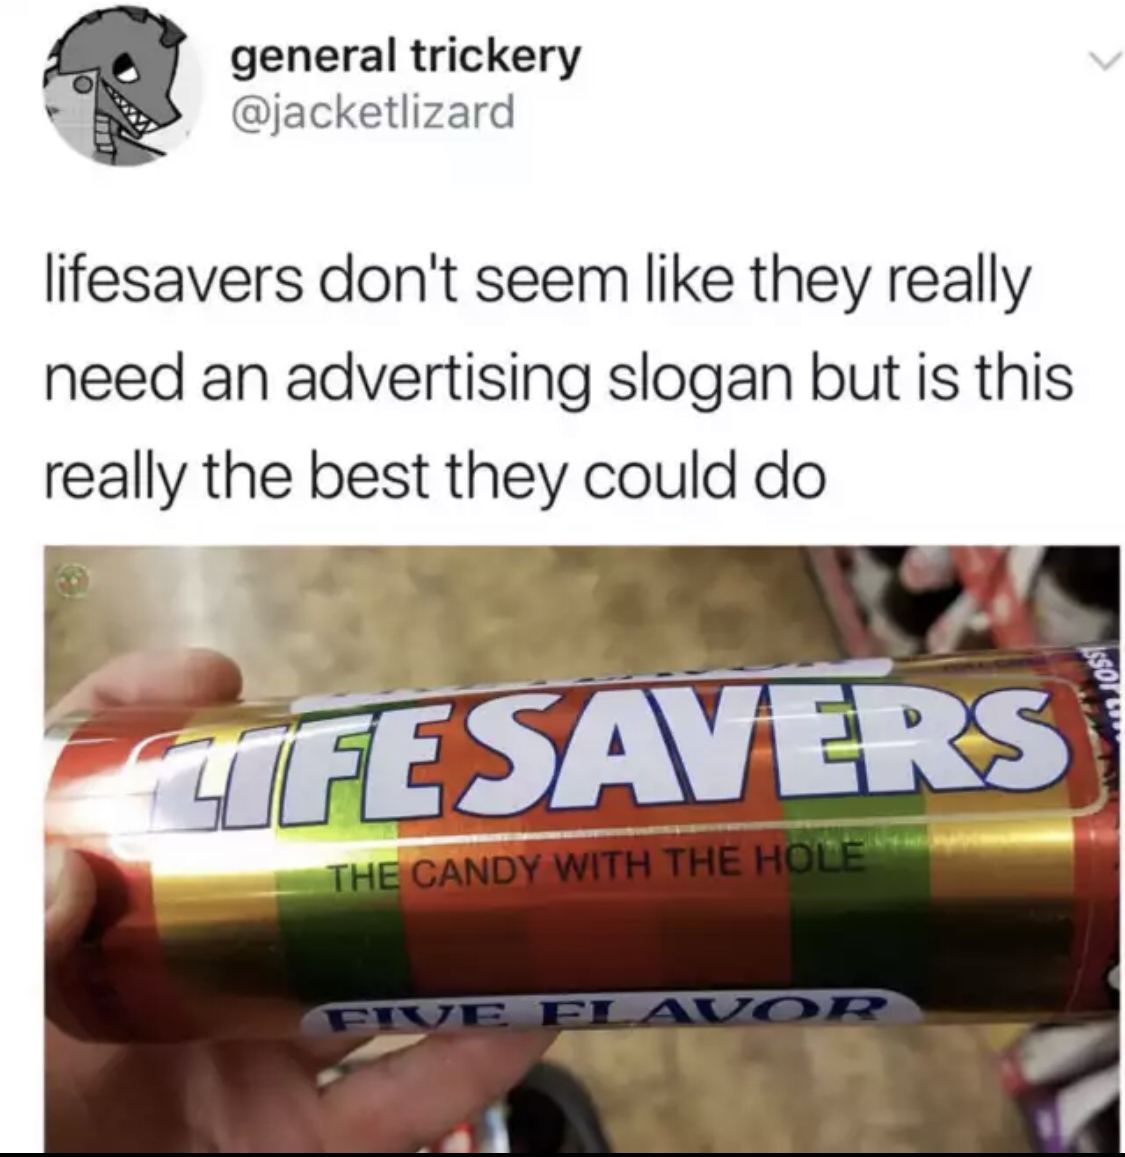 fetch media - general trickery lifesavers don't seem they really need an advertising slogan but is this really the best they could do Ifesavers The Candy With The Hole Five Flavor